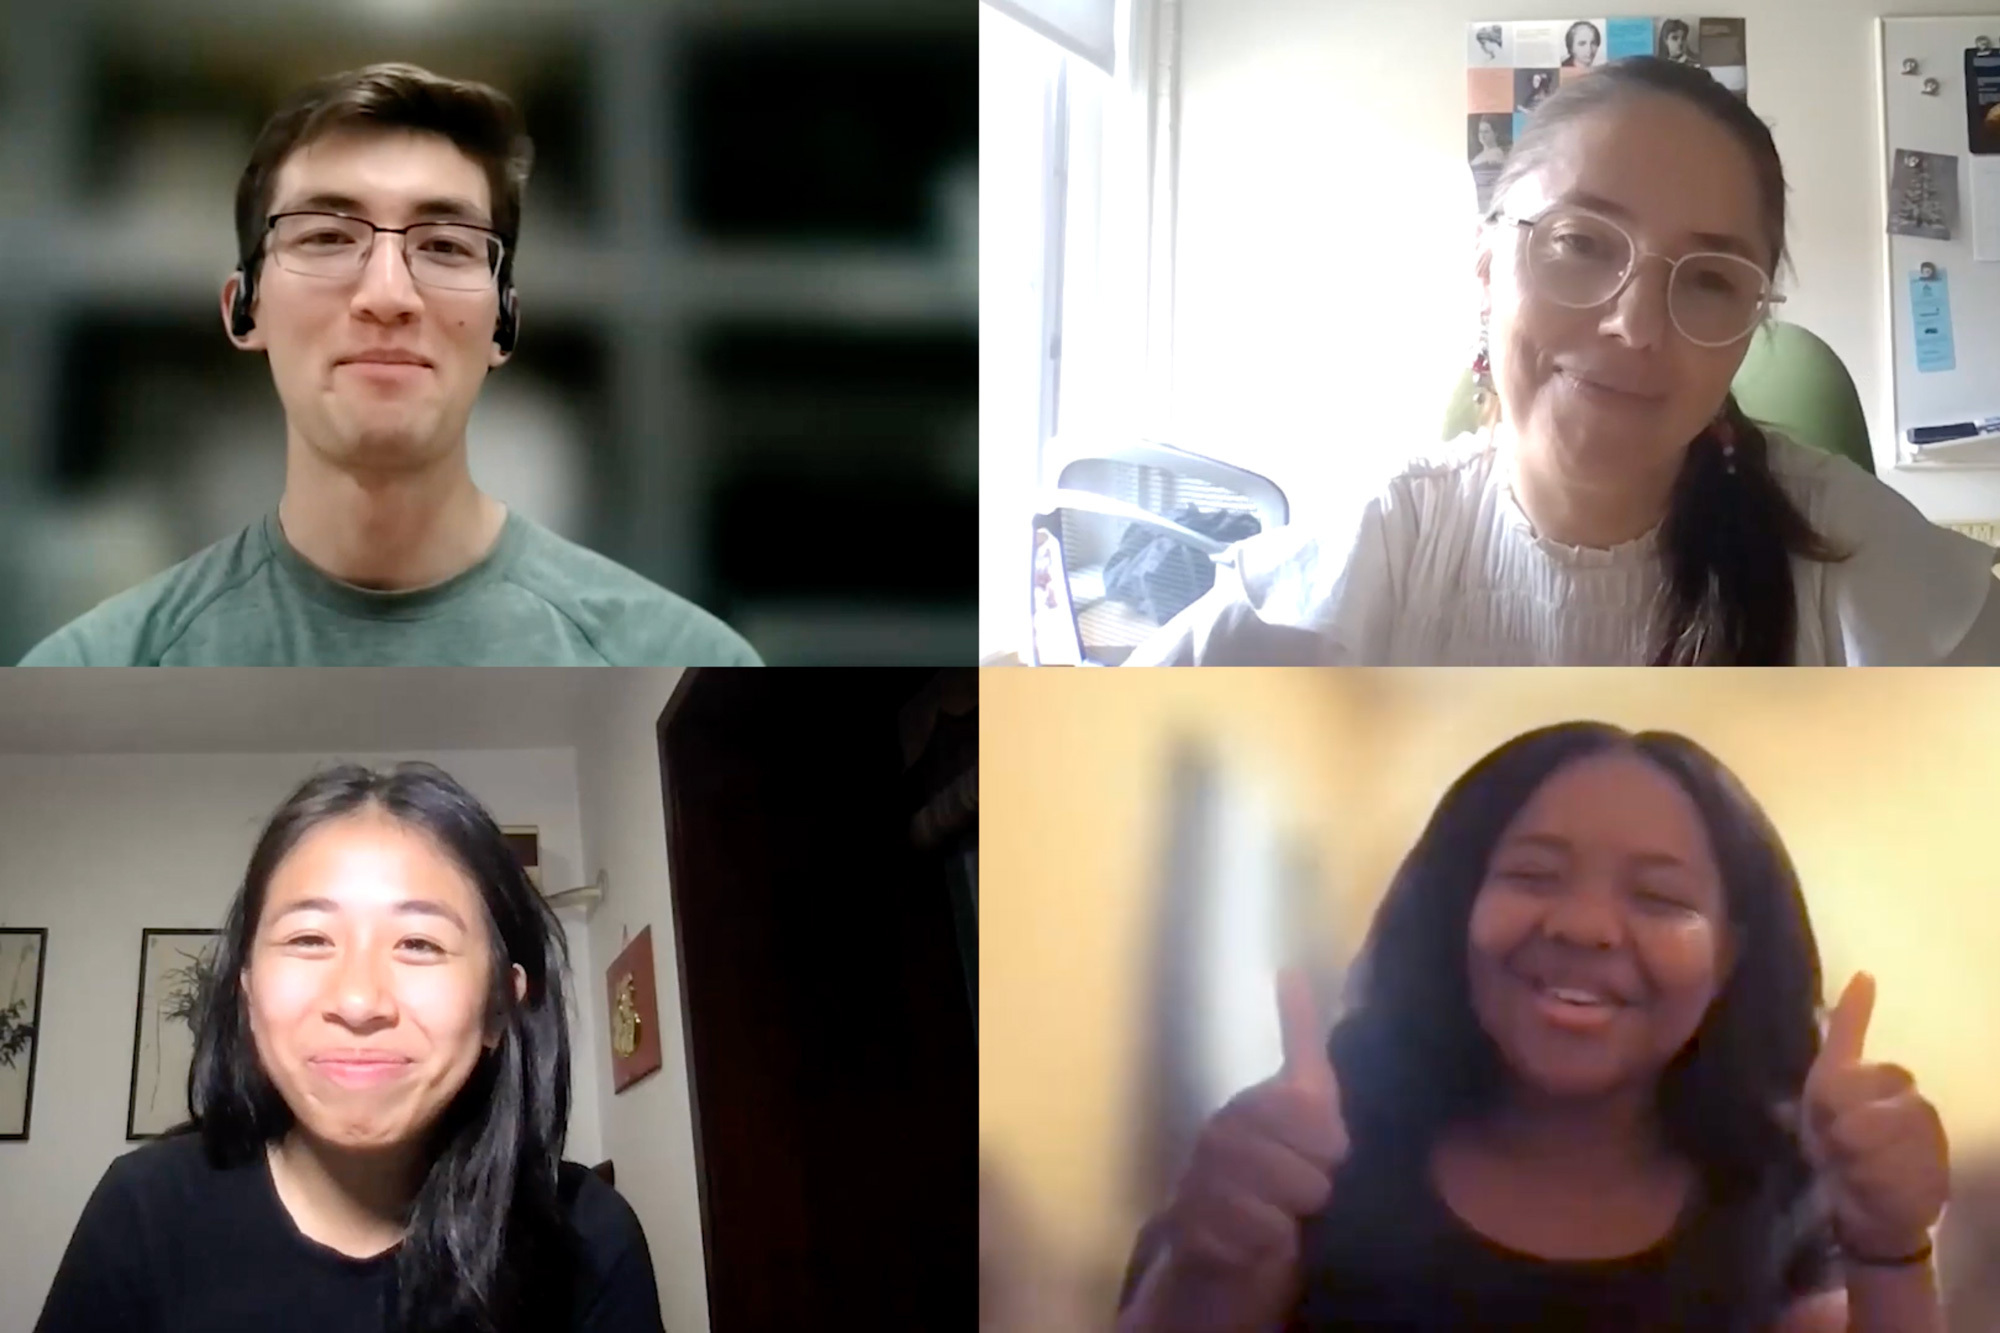 A still from the “Comm Lab Voices” video where clients share their stories for the MIT Communication Lab’s 10th Anniversary. Top row from left: Kirby Heck, PhD Candidate, MIT Civil and Environmental Engineering; Jasmina Burek, MIT Postdoctoral Associate ’19-21. Bottom row: Victoria Yang, MIT ChemE BSE’23; Jordan Alford, MIT ChemE BSE’20.